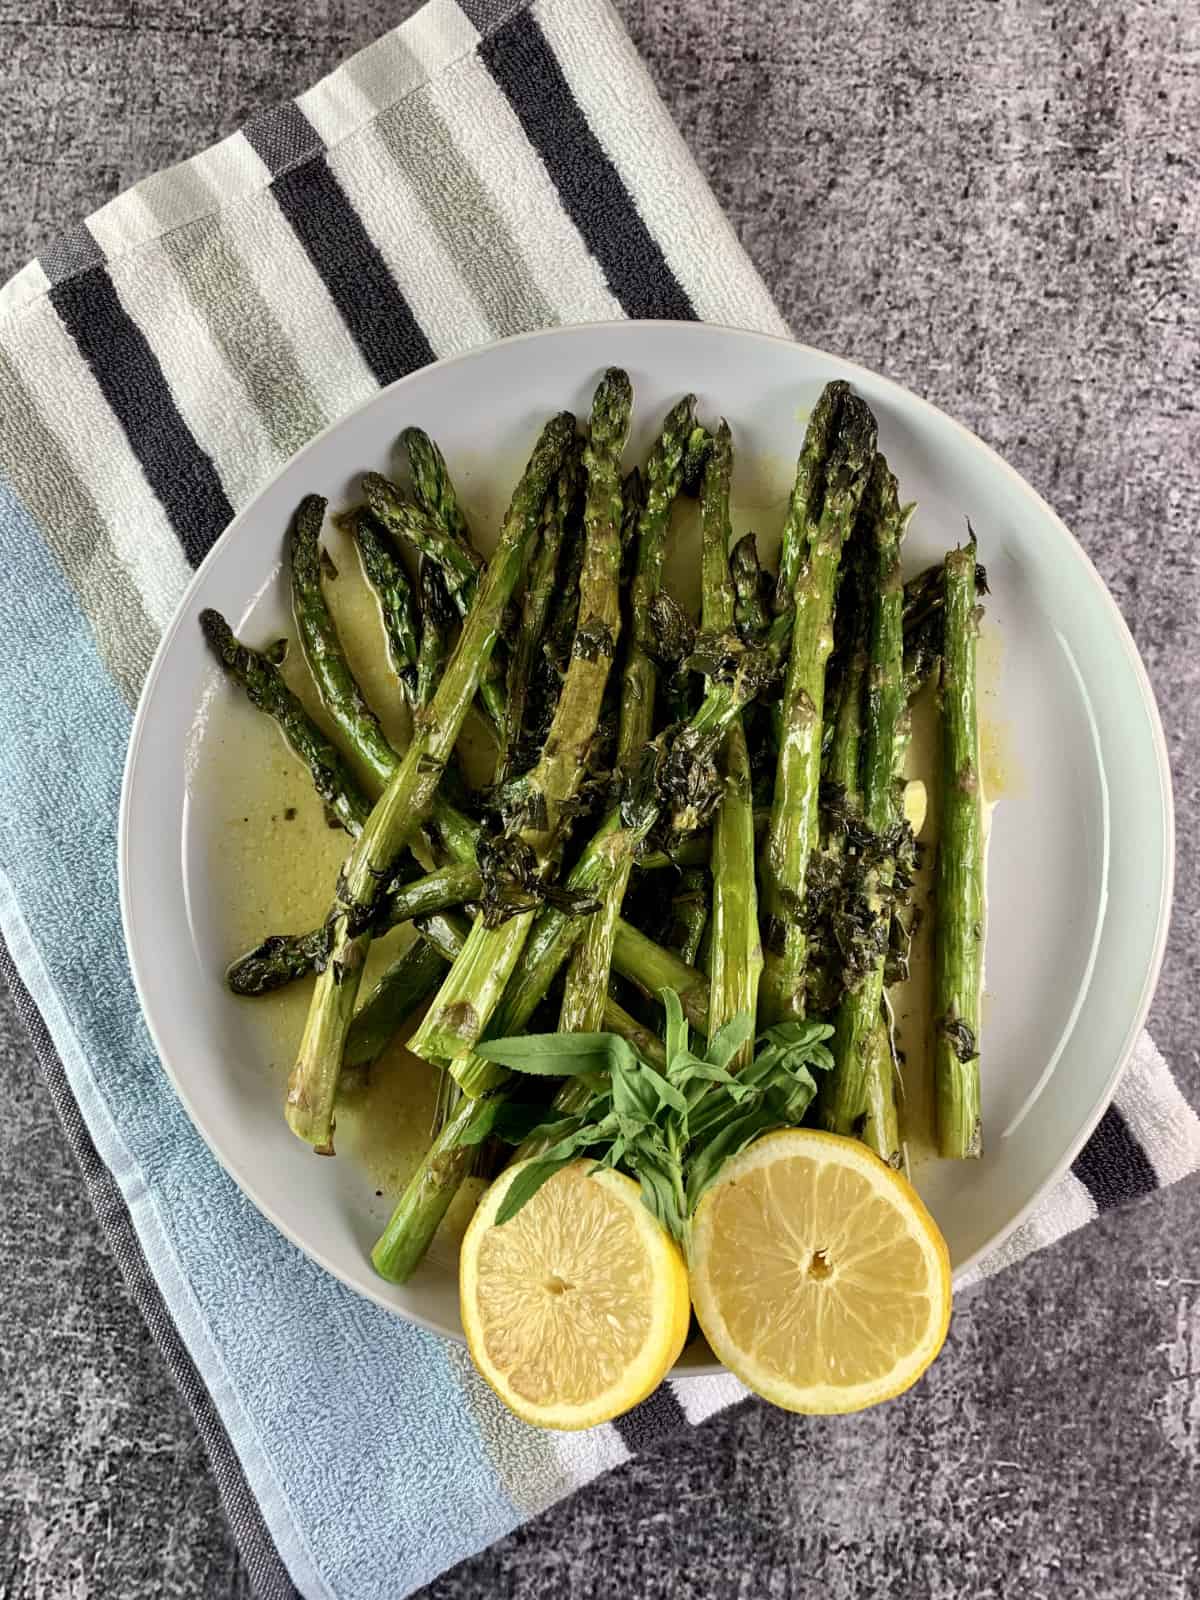 Oven roasted asparagus on a plate on top of a striped napking with lemon halves at the bottom.